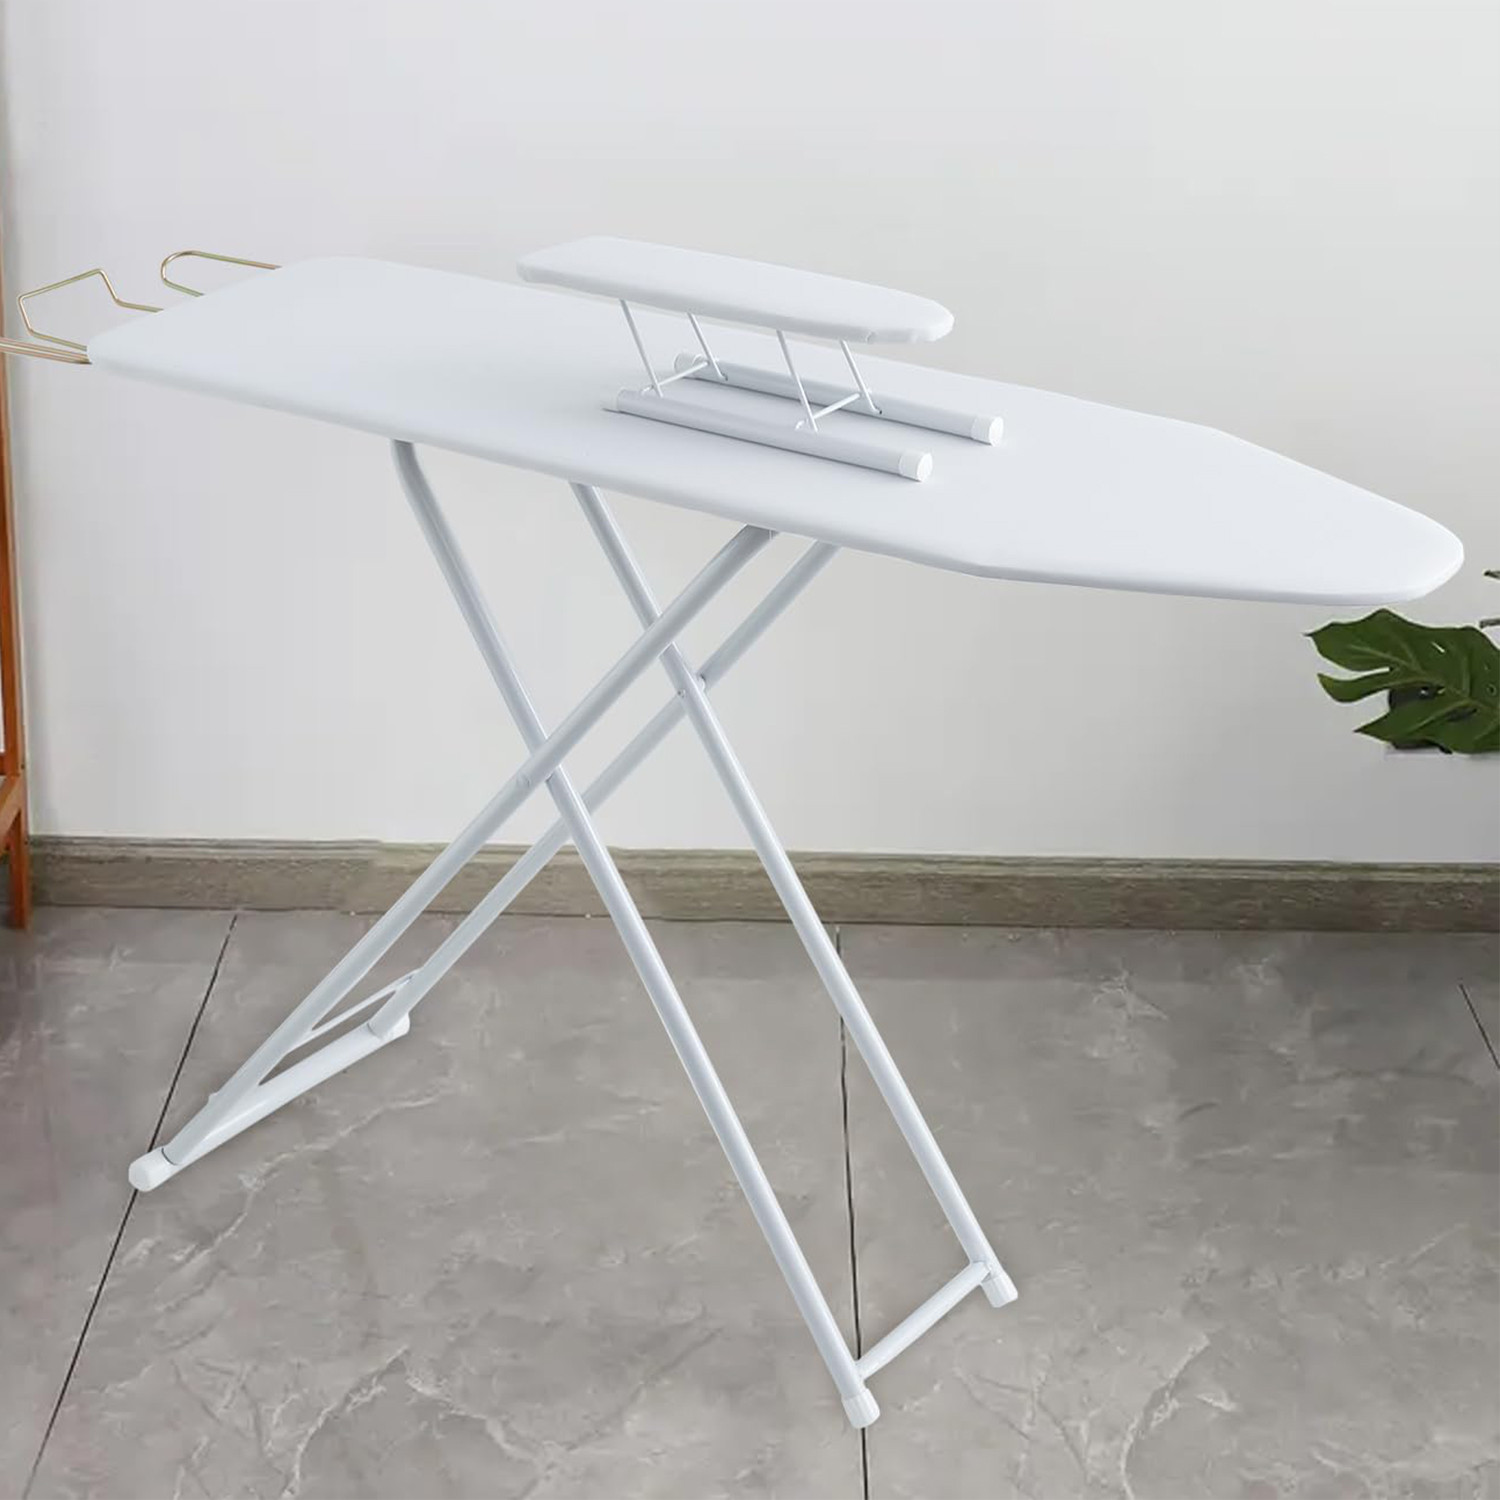 Kuber Industries 42 Inch Ironing Board With Small Board|Ironing Stand For Clothes|Press Table for Home (White)